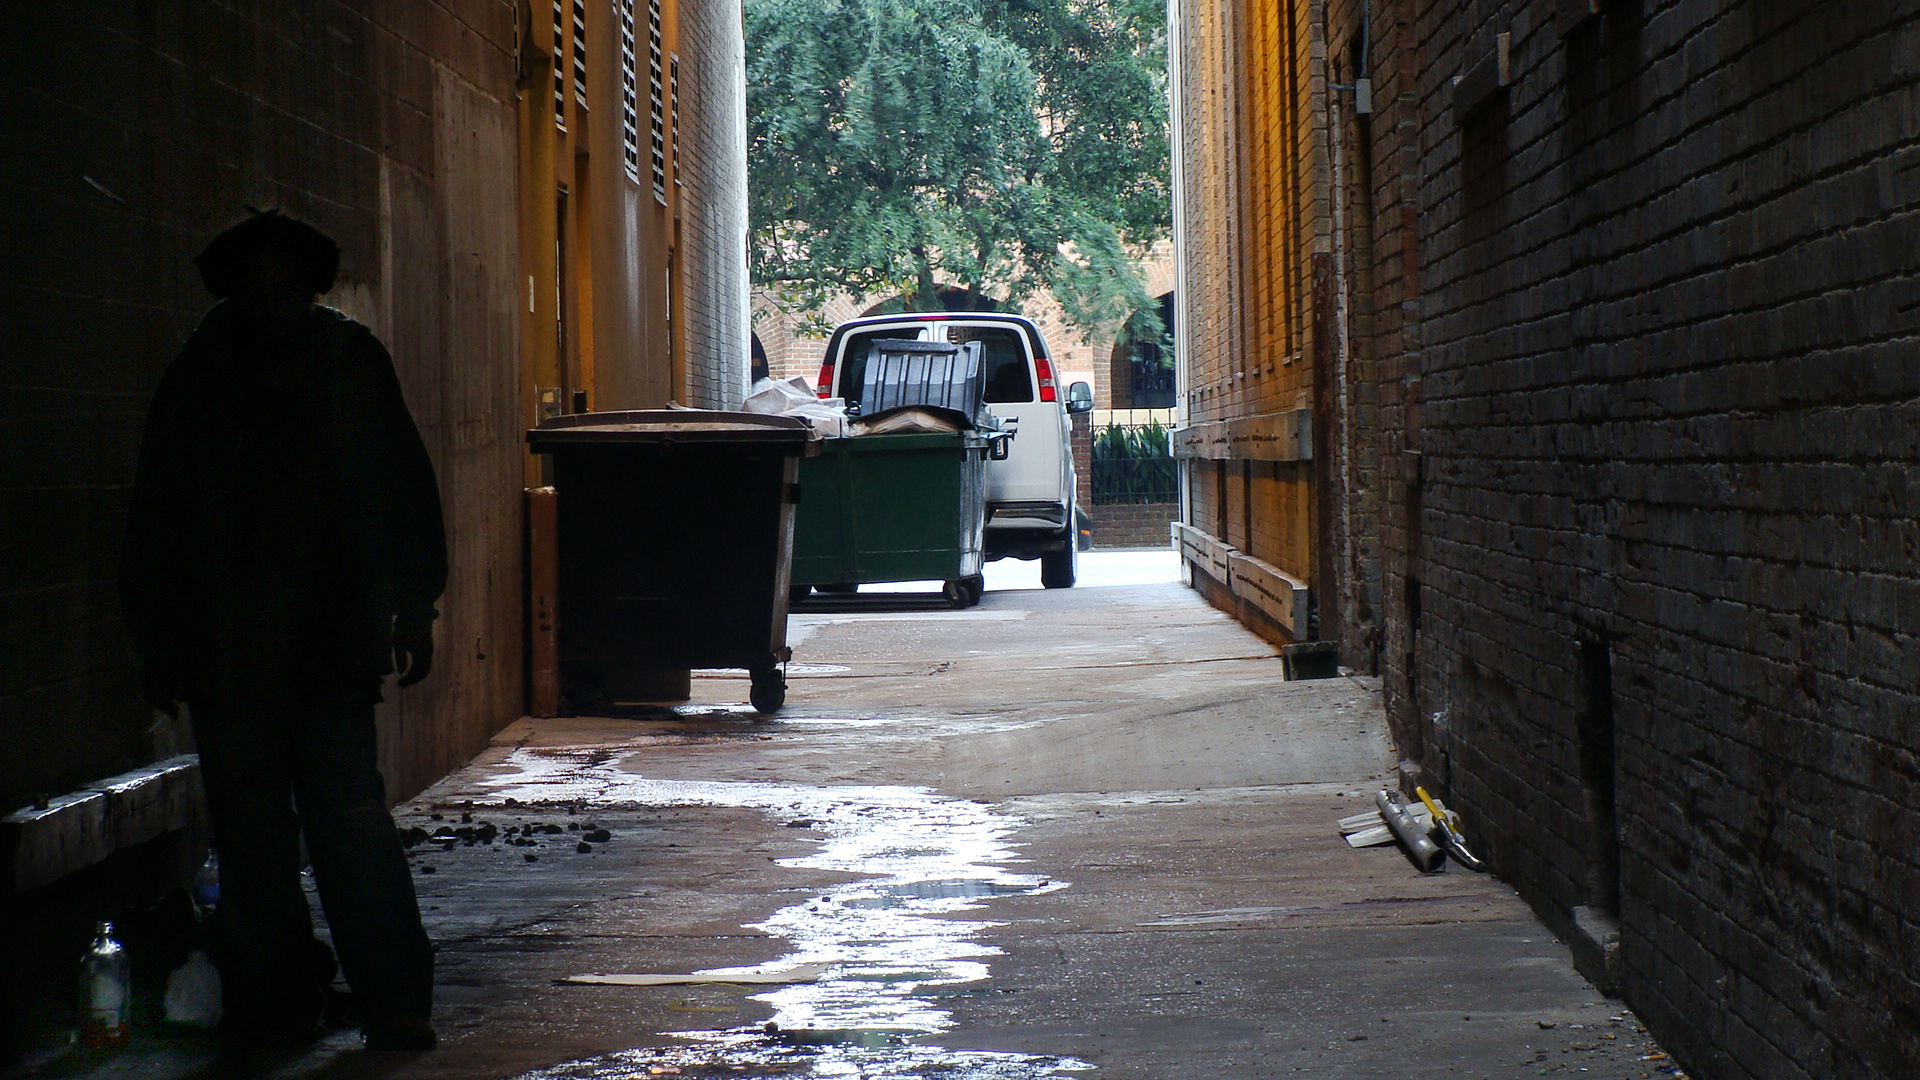 [Image: down_a_dark_alley_by_logic00-d3fxeuy.jpg]